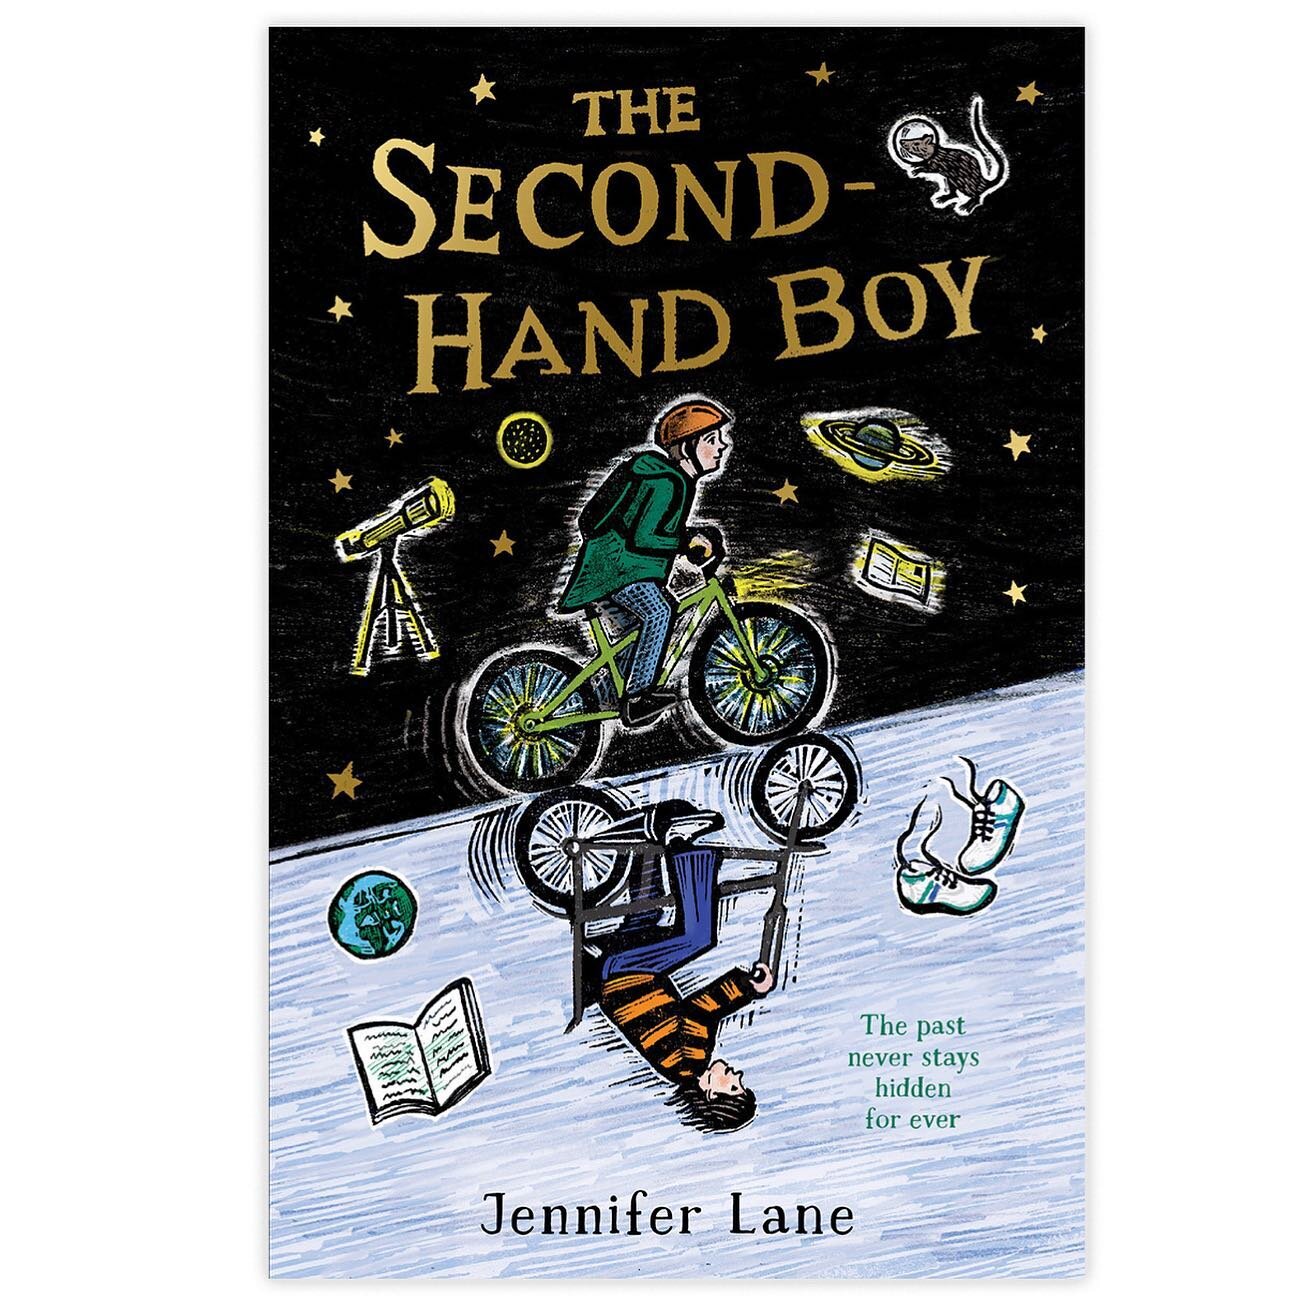 The Second Hand Boy by Jennifer Lane @thegreenwitchwriter is out now! Published @uclan_publishing Here&rsquo;s my #bookcoverdesign ✨Always lovely working with @amycooperdesign Great story for children ages 8-12 Highly recommend ! Originally sketched 